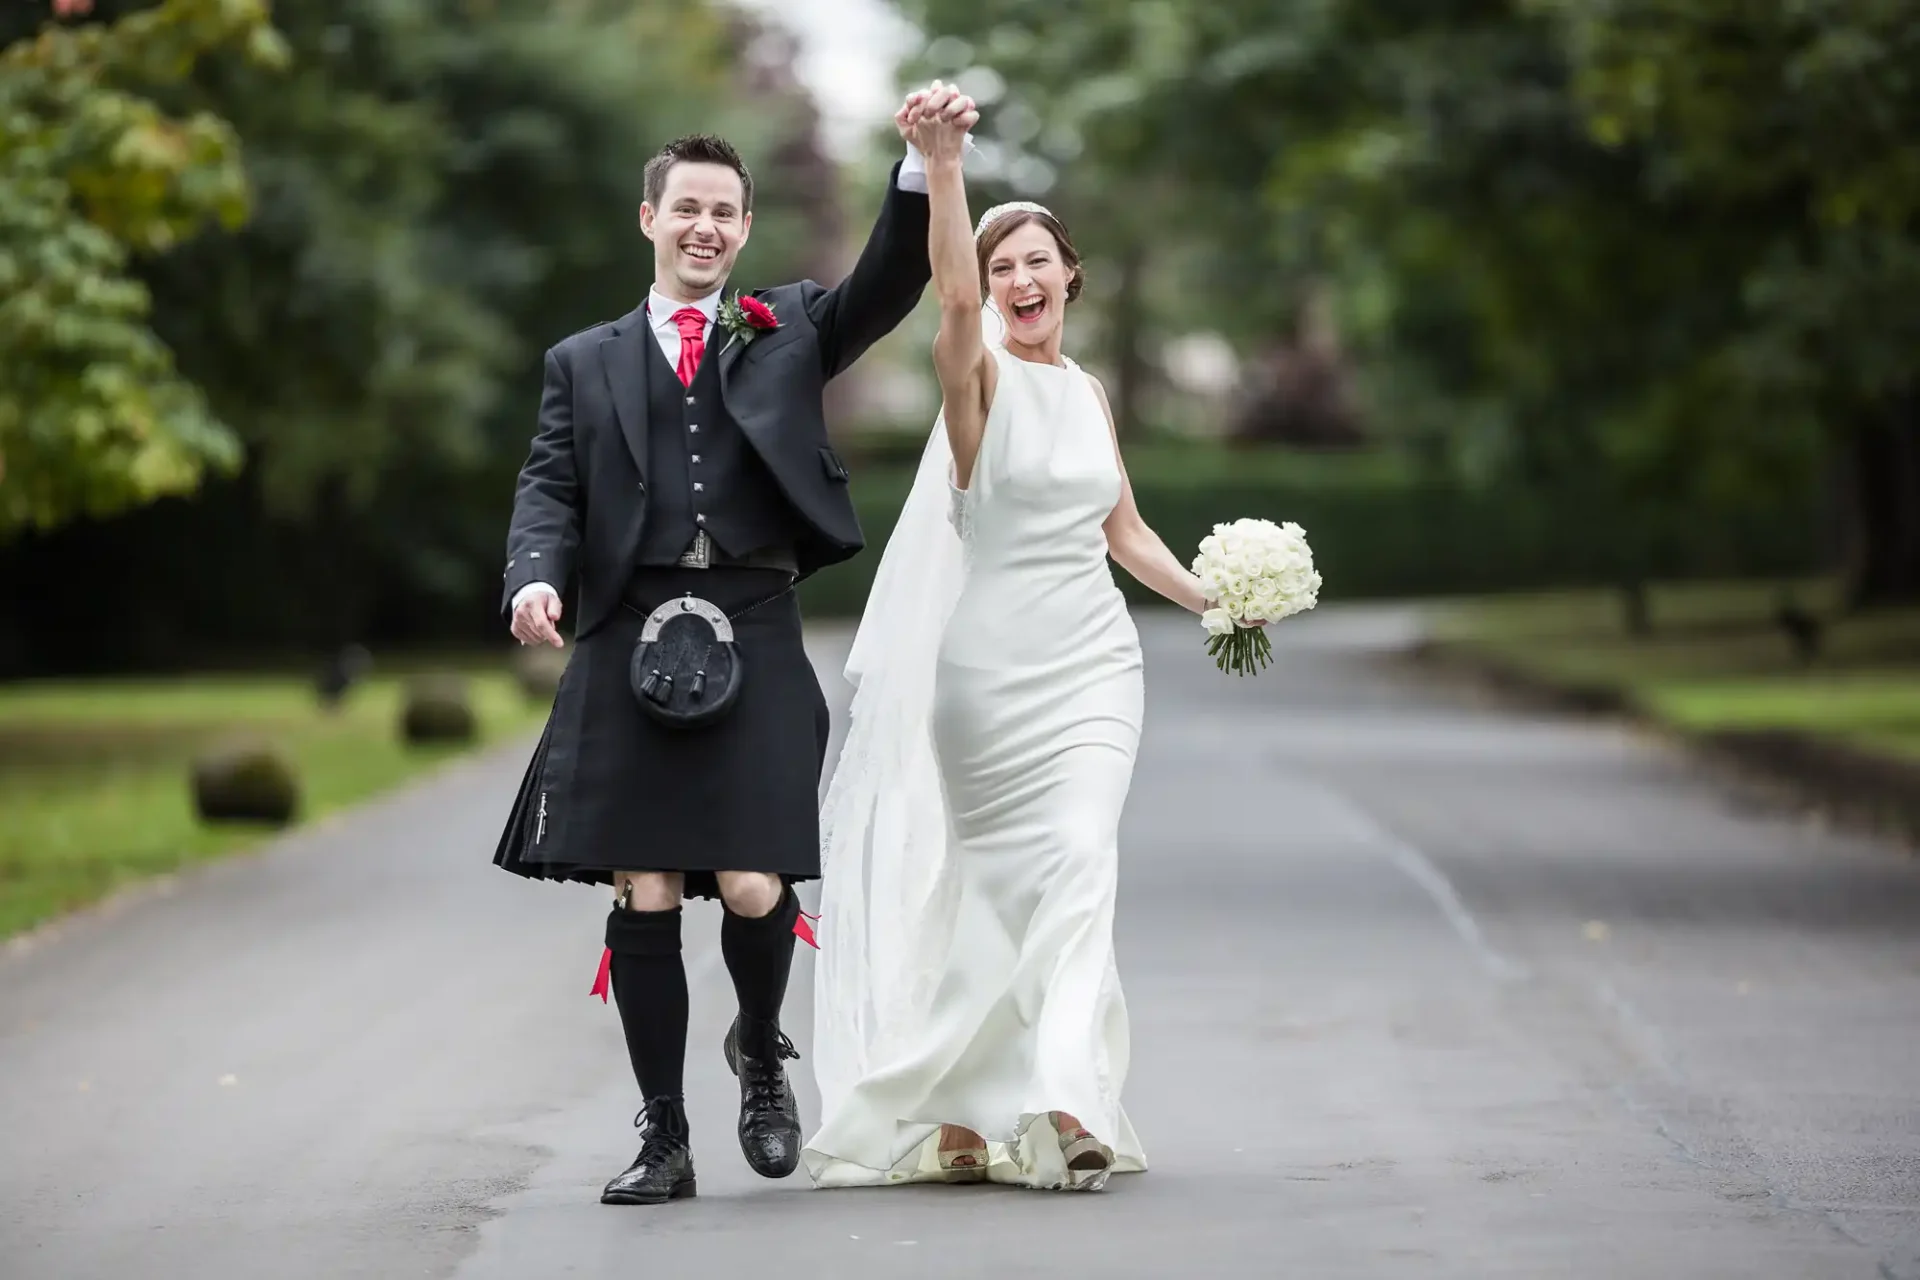 A joyful couple, with the groom in a kilt and the bride in a white gown, walk hand-in-hand down a tree-lined path, celebrating their wedding day at Prestonfield House - Jen and David